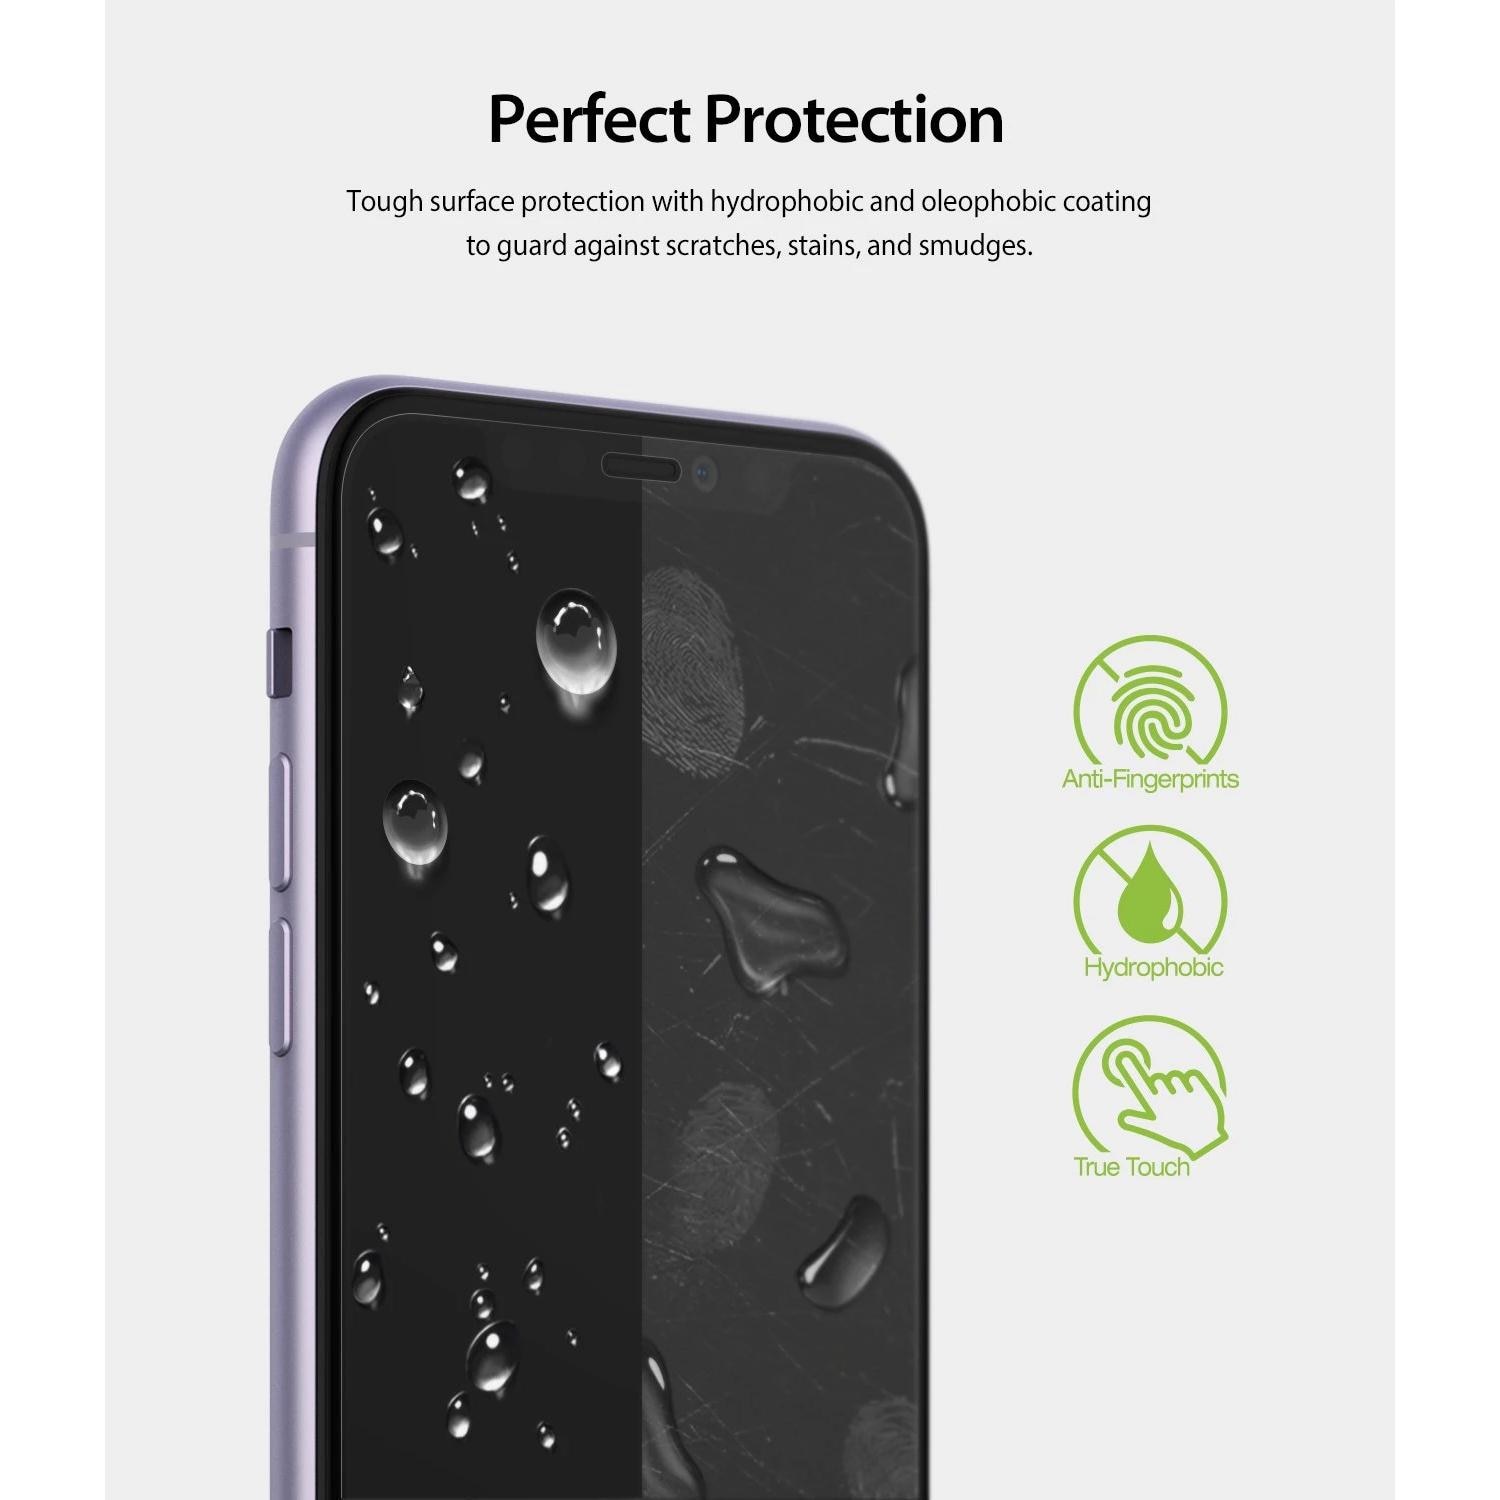 Dual Easy Screen Protector iPhone 11/XR (2-pack)